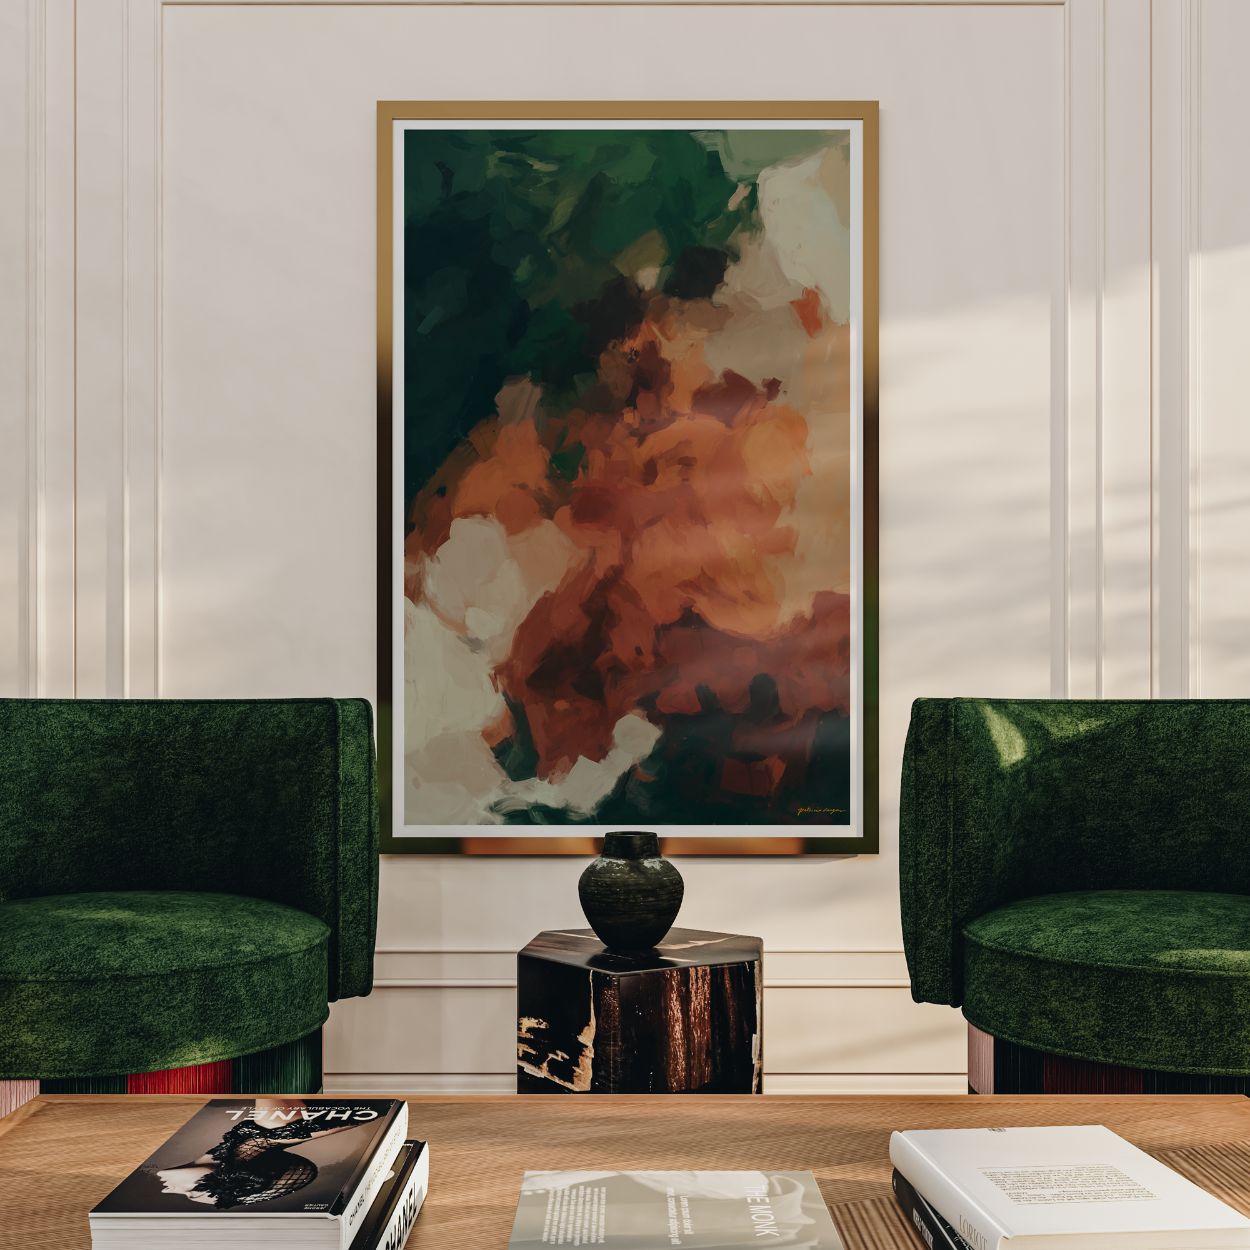 Cedar, green and brown colorful abstract wall art print by Parima Studio. Oversize art for grand dining room